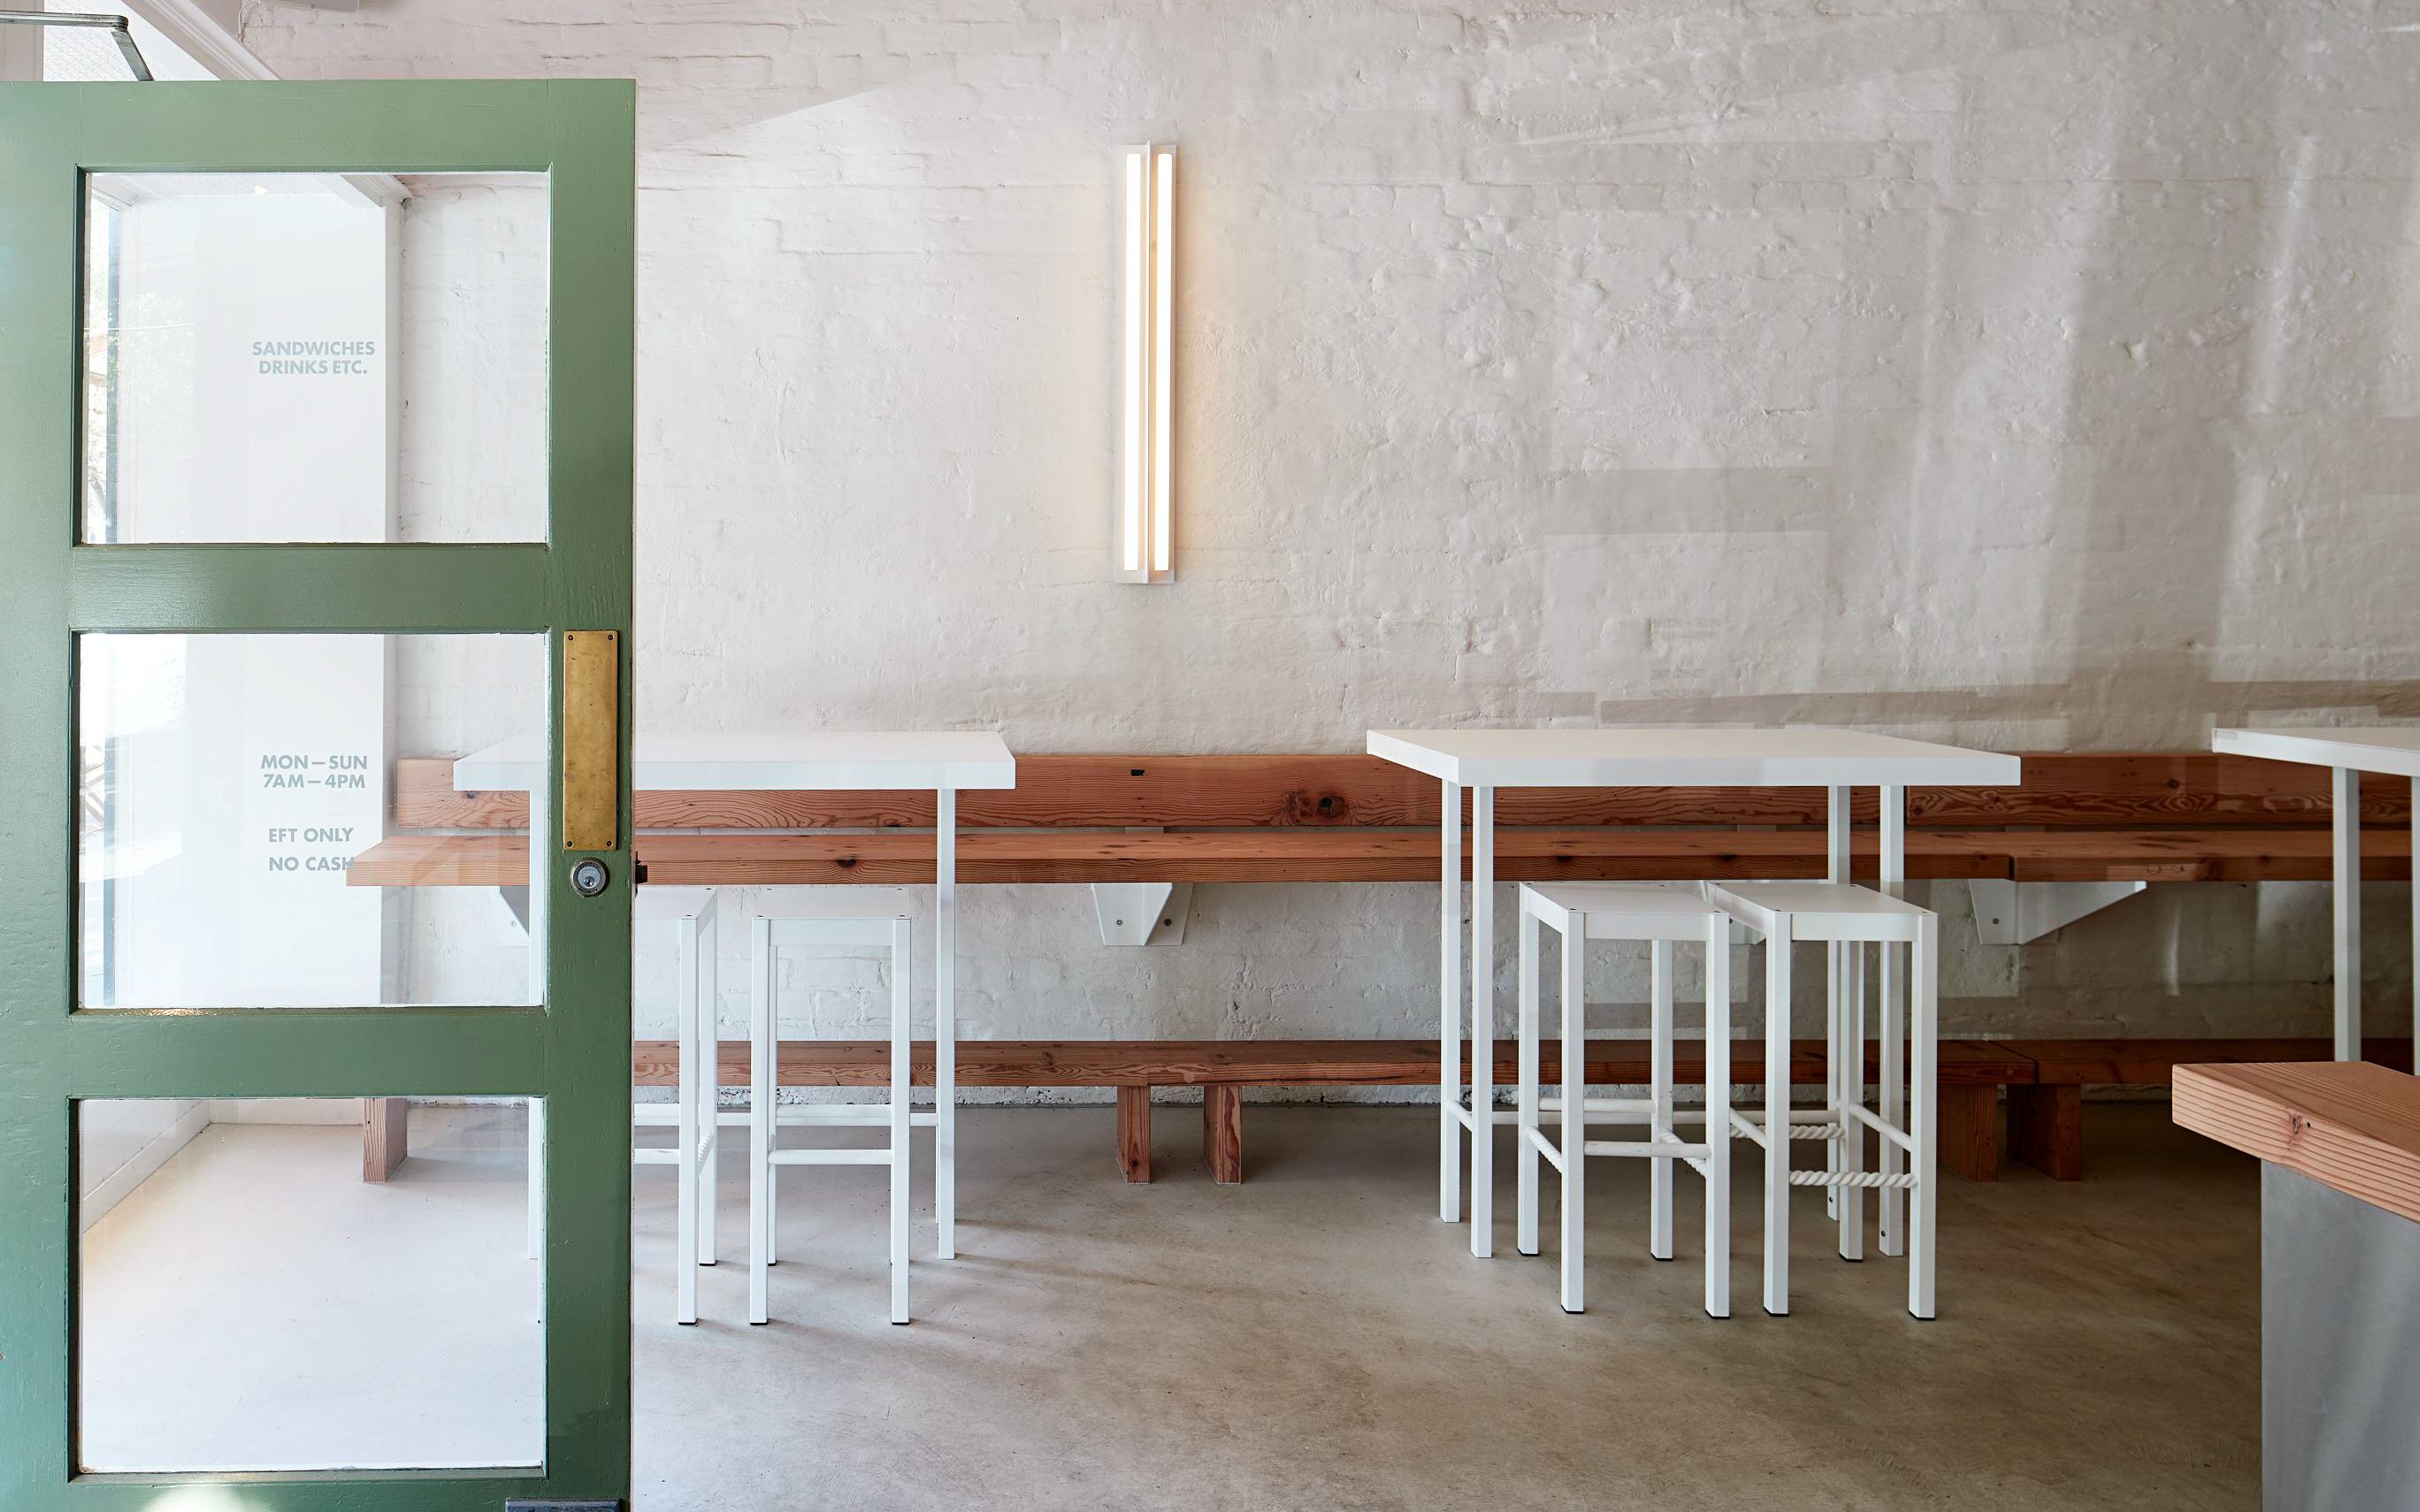 A series of white steel tables and stools in an airy, rustic space with white painted walls and a open door